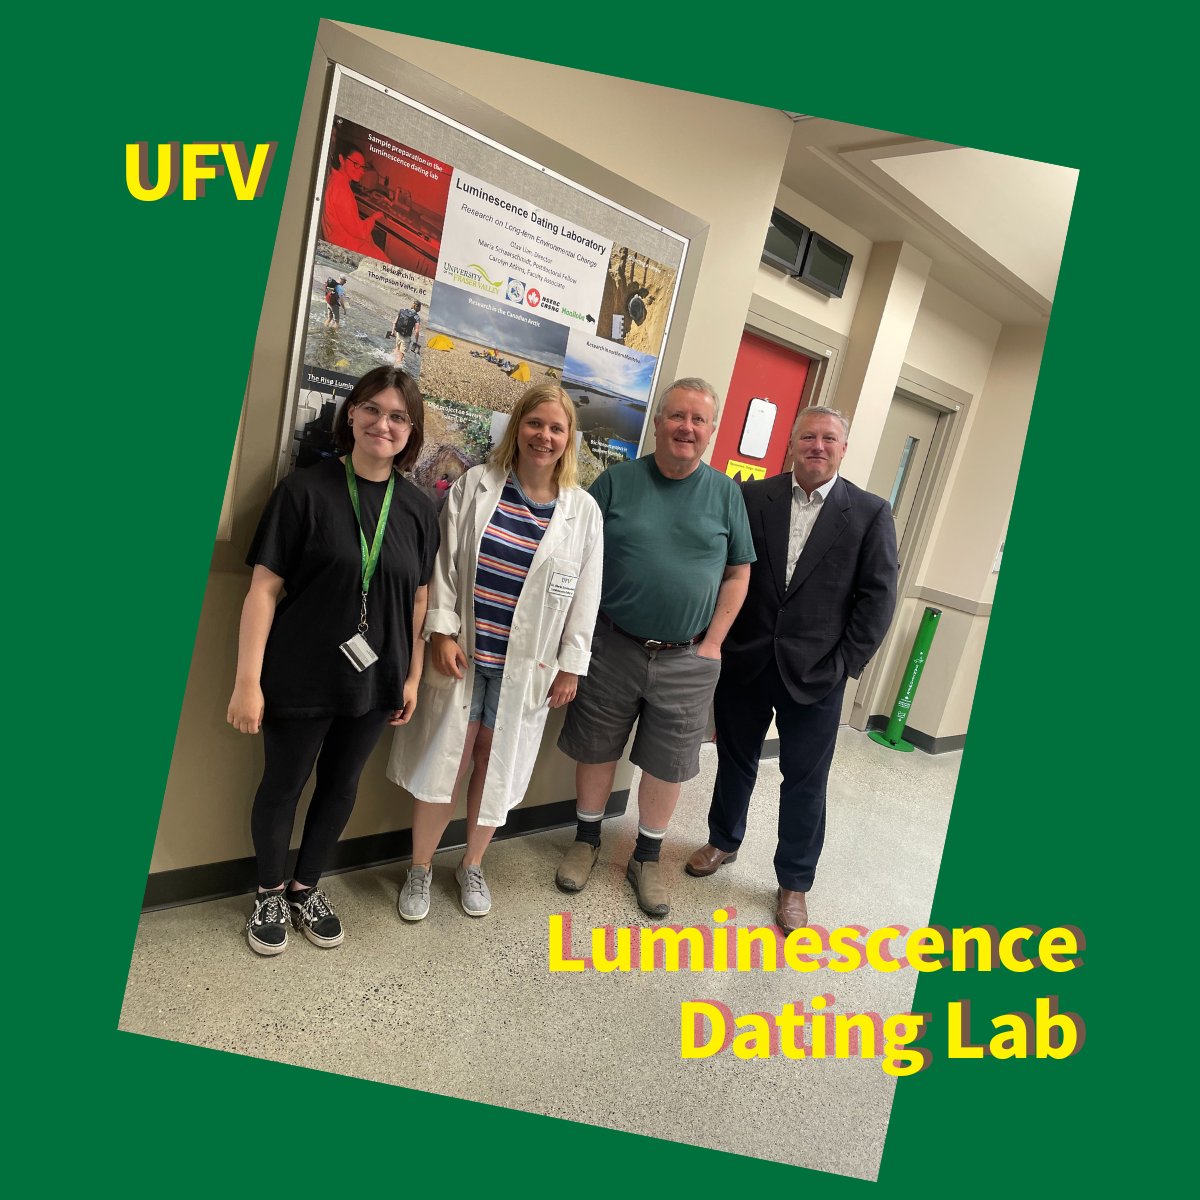 #DYK?
The #SchoolOfLandUse and #EnvironmentalChange at @goUFV is the home of a 1-of-a-kind Western Canadian #LuminescenceDatingLaboratory.

Thank you Maria, Nicola + Dr. Olav Lian for the tour of #goUFV’s #LuminescenceLab.
bit.ly/UFV-Luminescen…

#Geography
#Science
#Environment